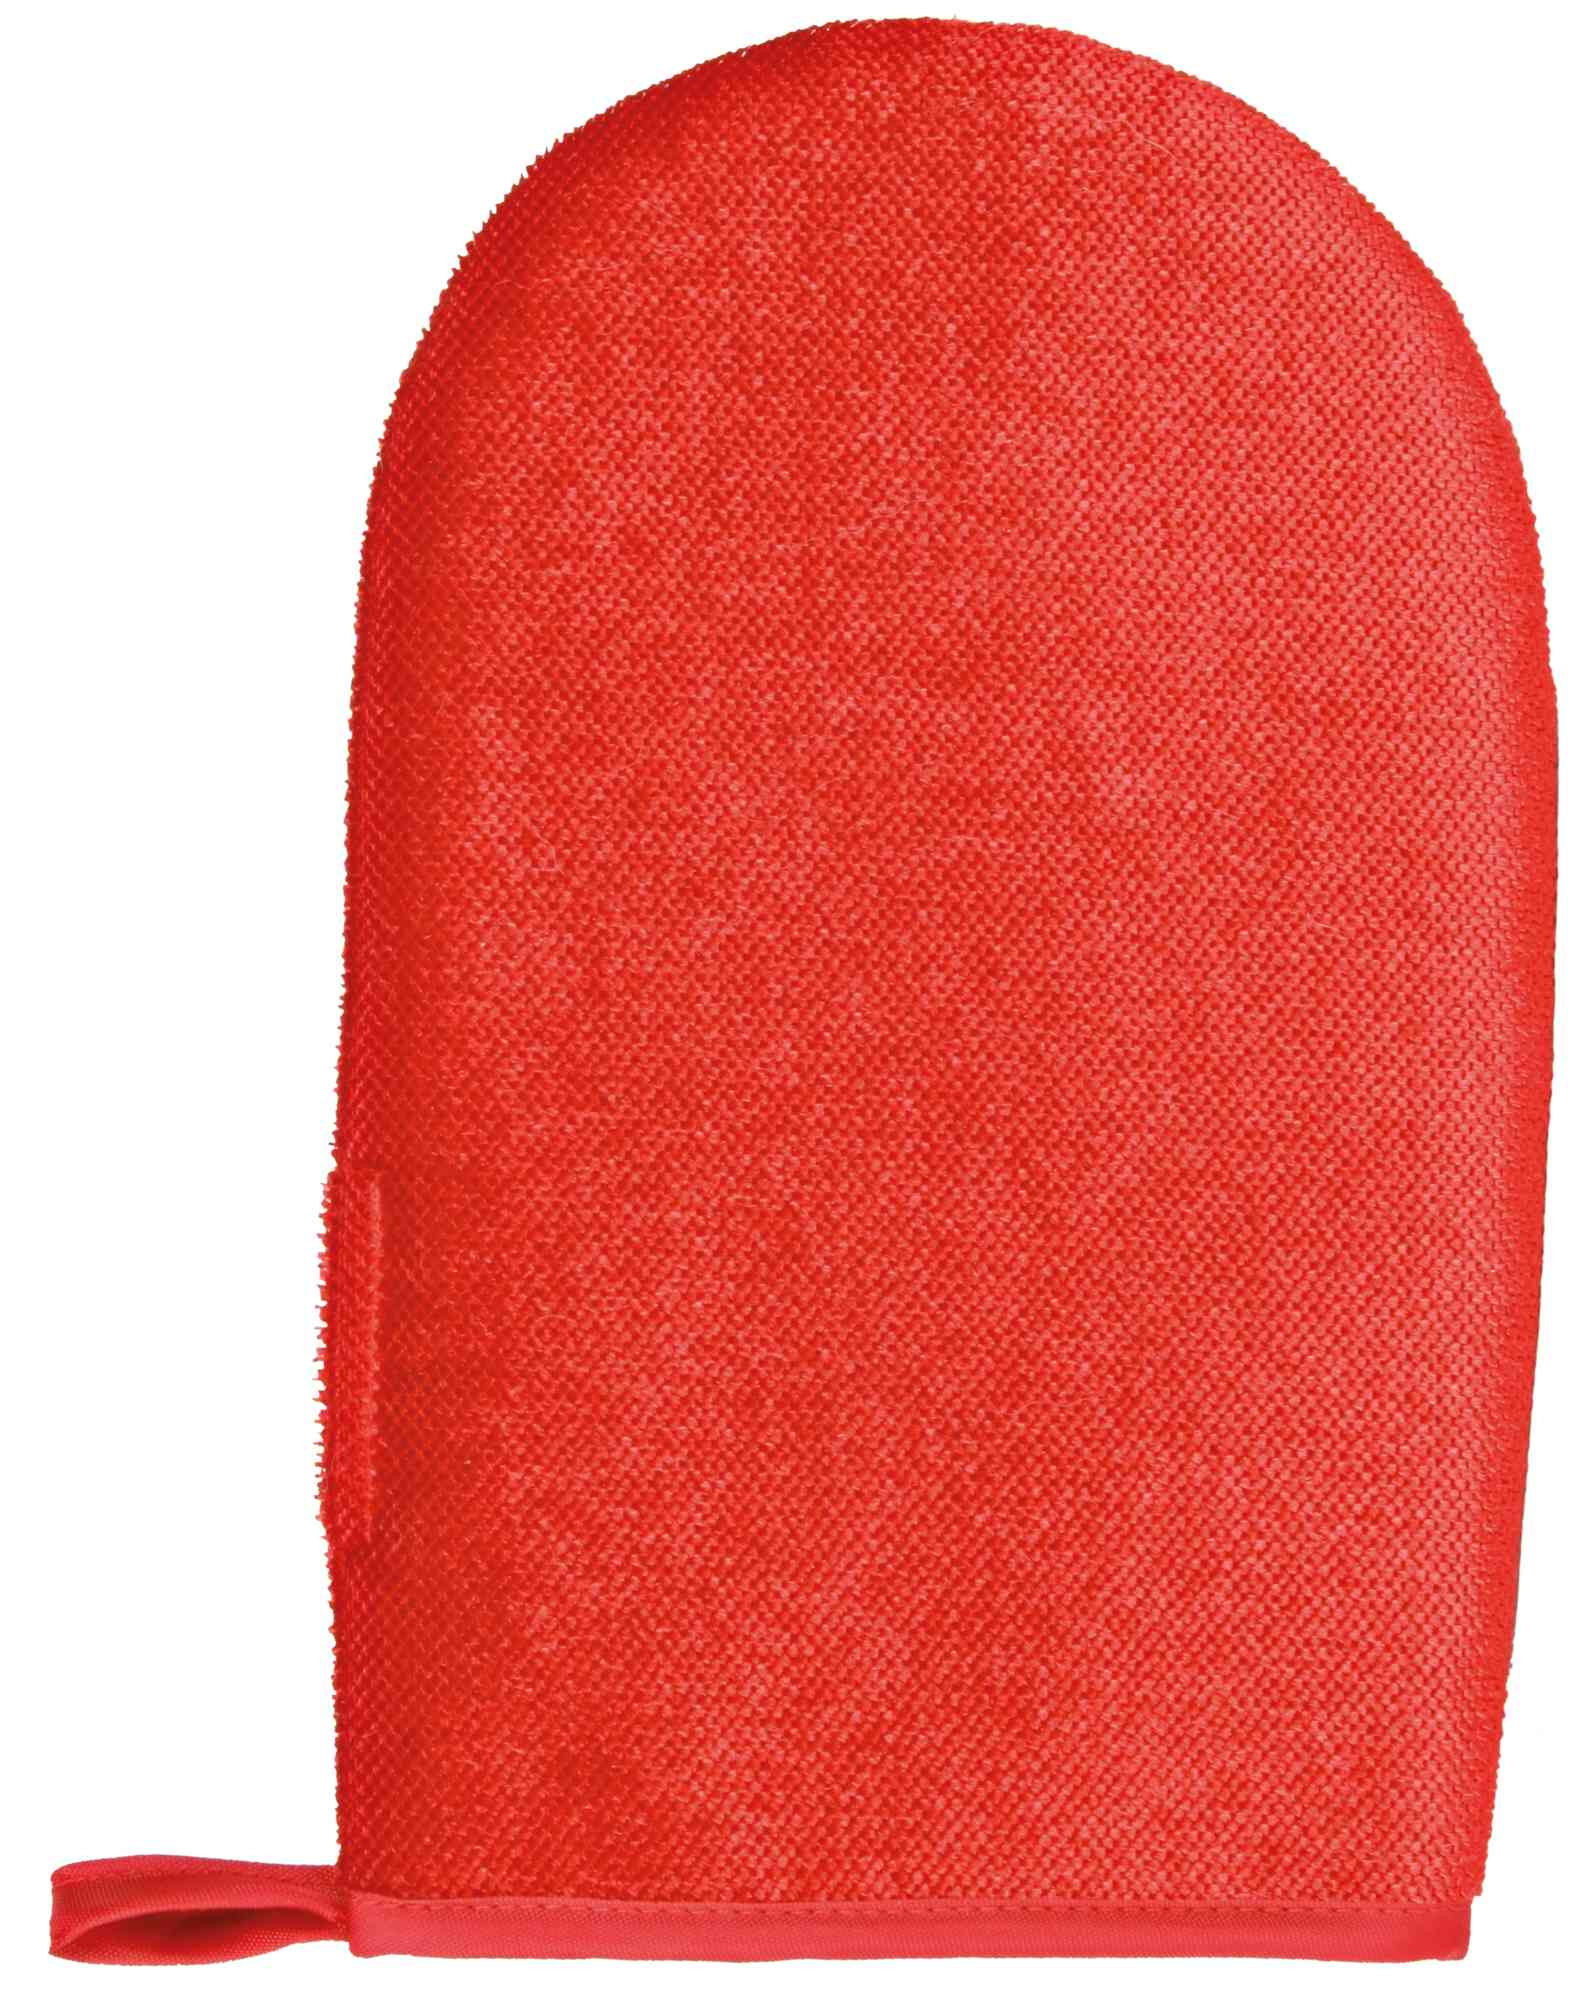 Trixie Lint Glove, Double-Sided, 25 Cm, Red New